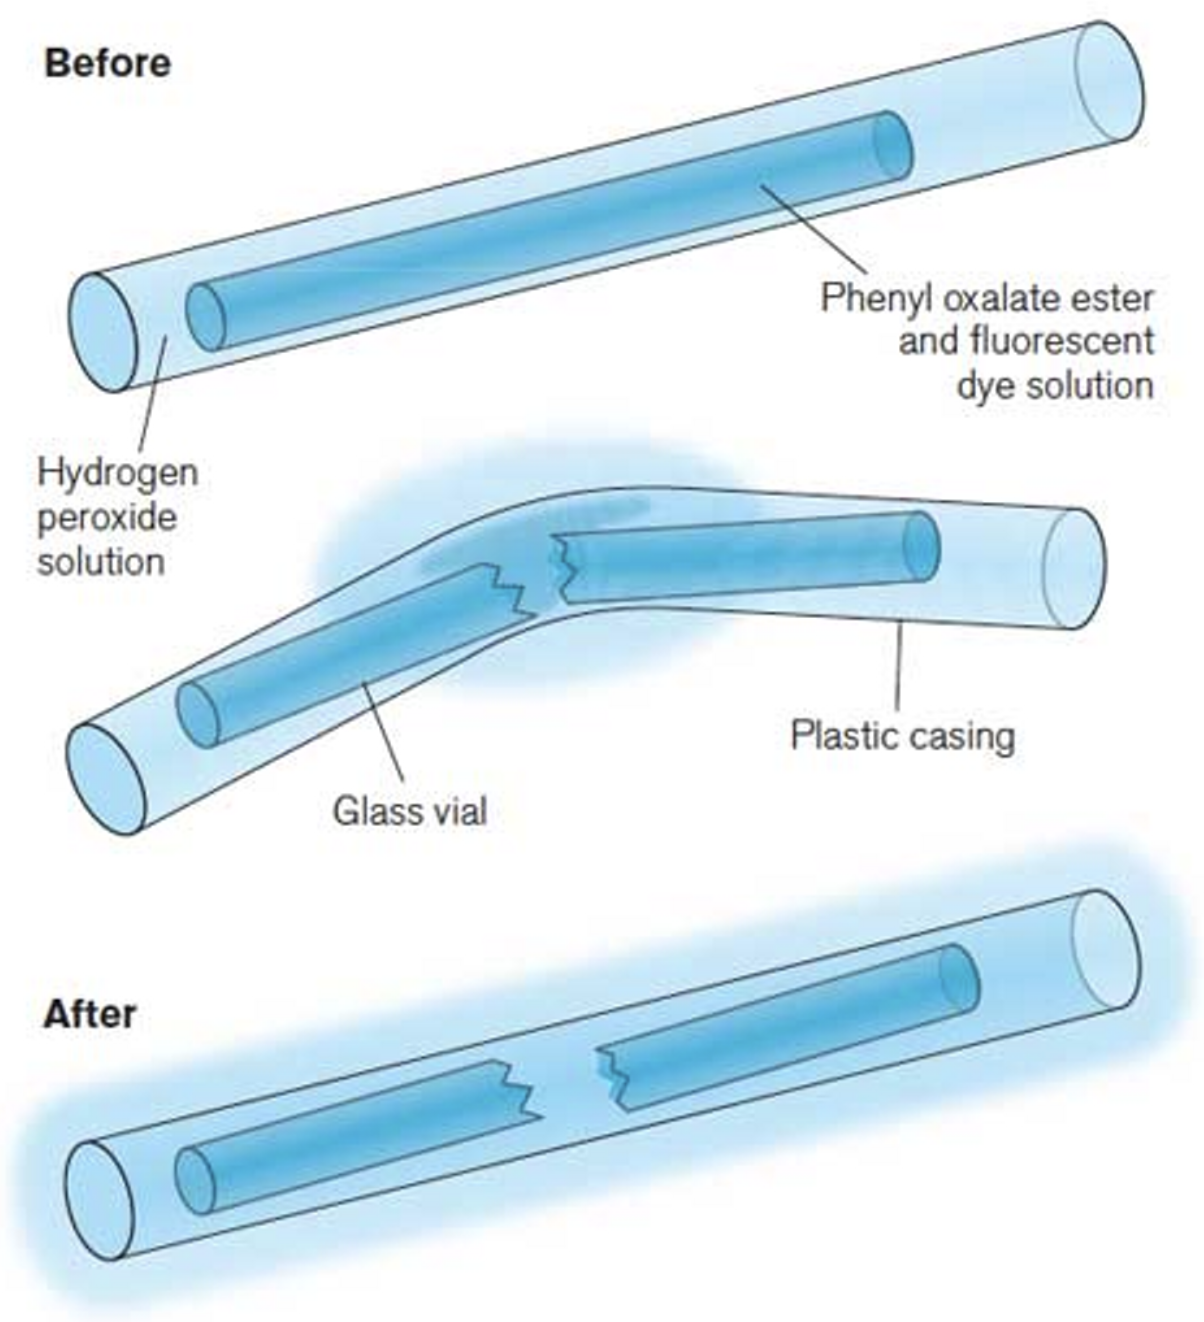 <ul><li><p>Light sticks operate by causing 2 chemicals to mix</p><ul><li><p>One chemical is in a narrow, small glass vial in the middle of the stick, the second is in the main body of the stick.</p></li><li><p>Bending causes the small glass vial to break, allowing the chemicals to mix and produce visible light.</p></li></ul></li></ul>